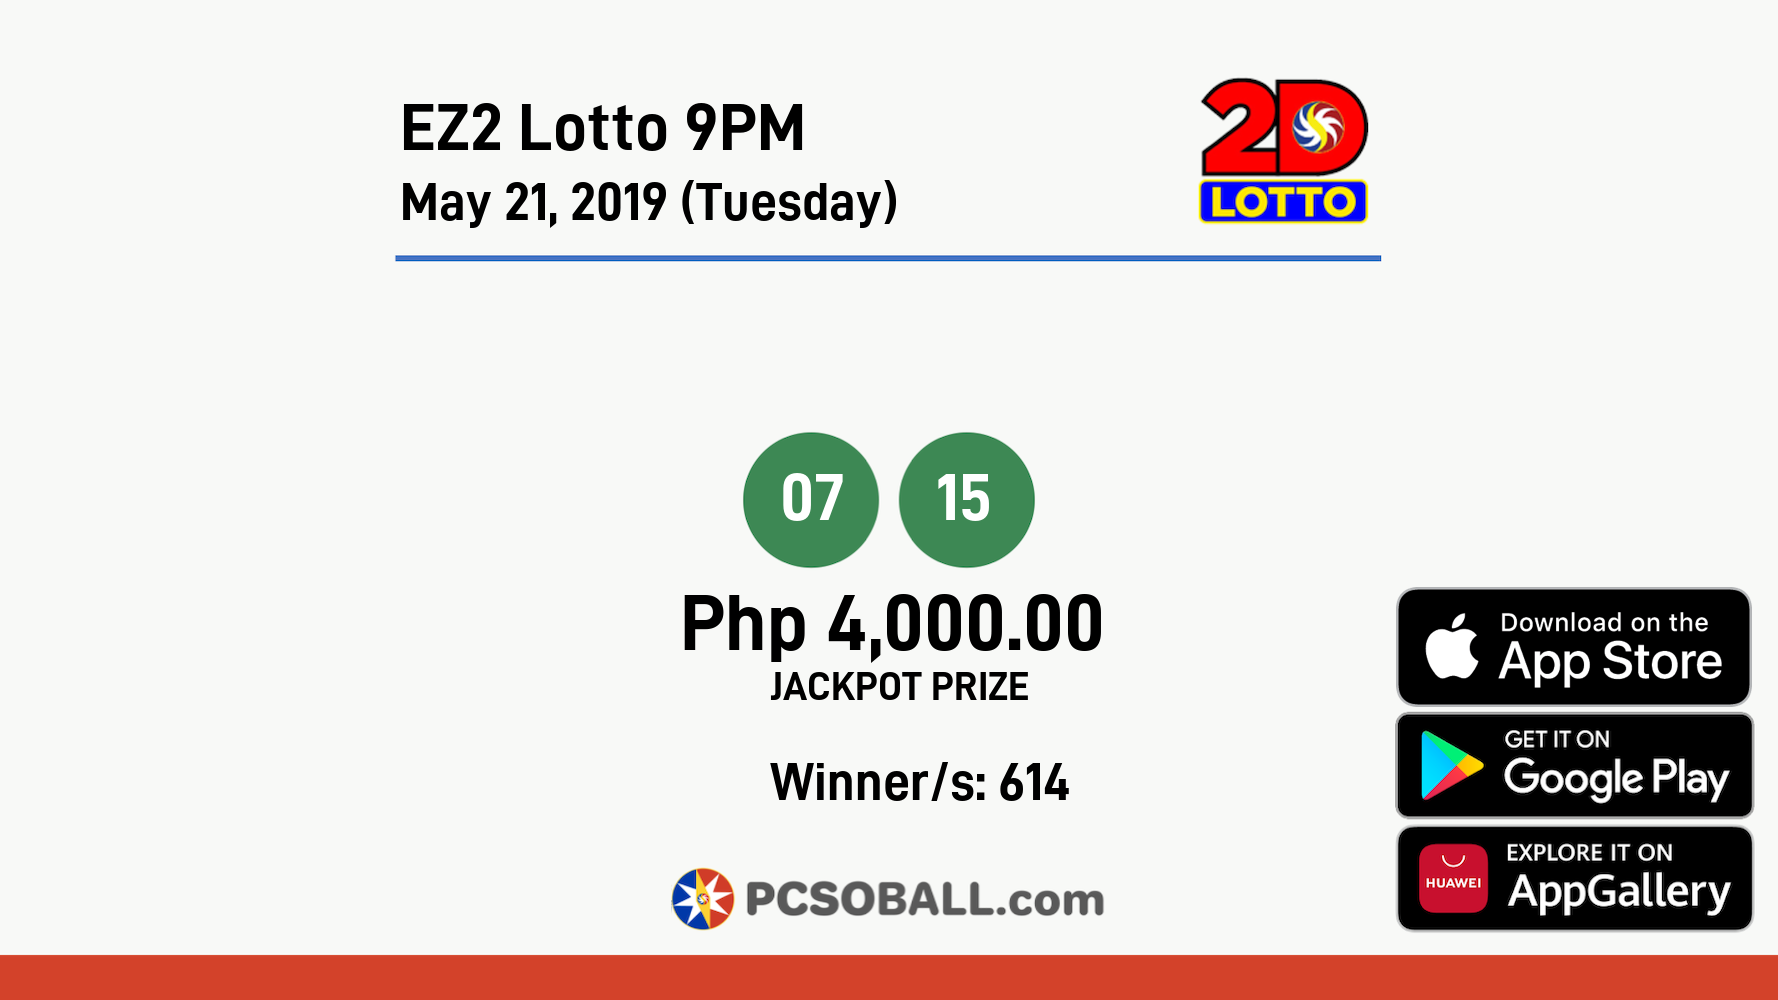 EZ2 Lotto 9PM May 21, 2019 (Tuesday) Result